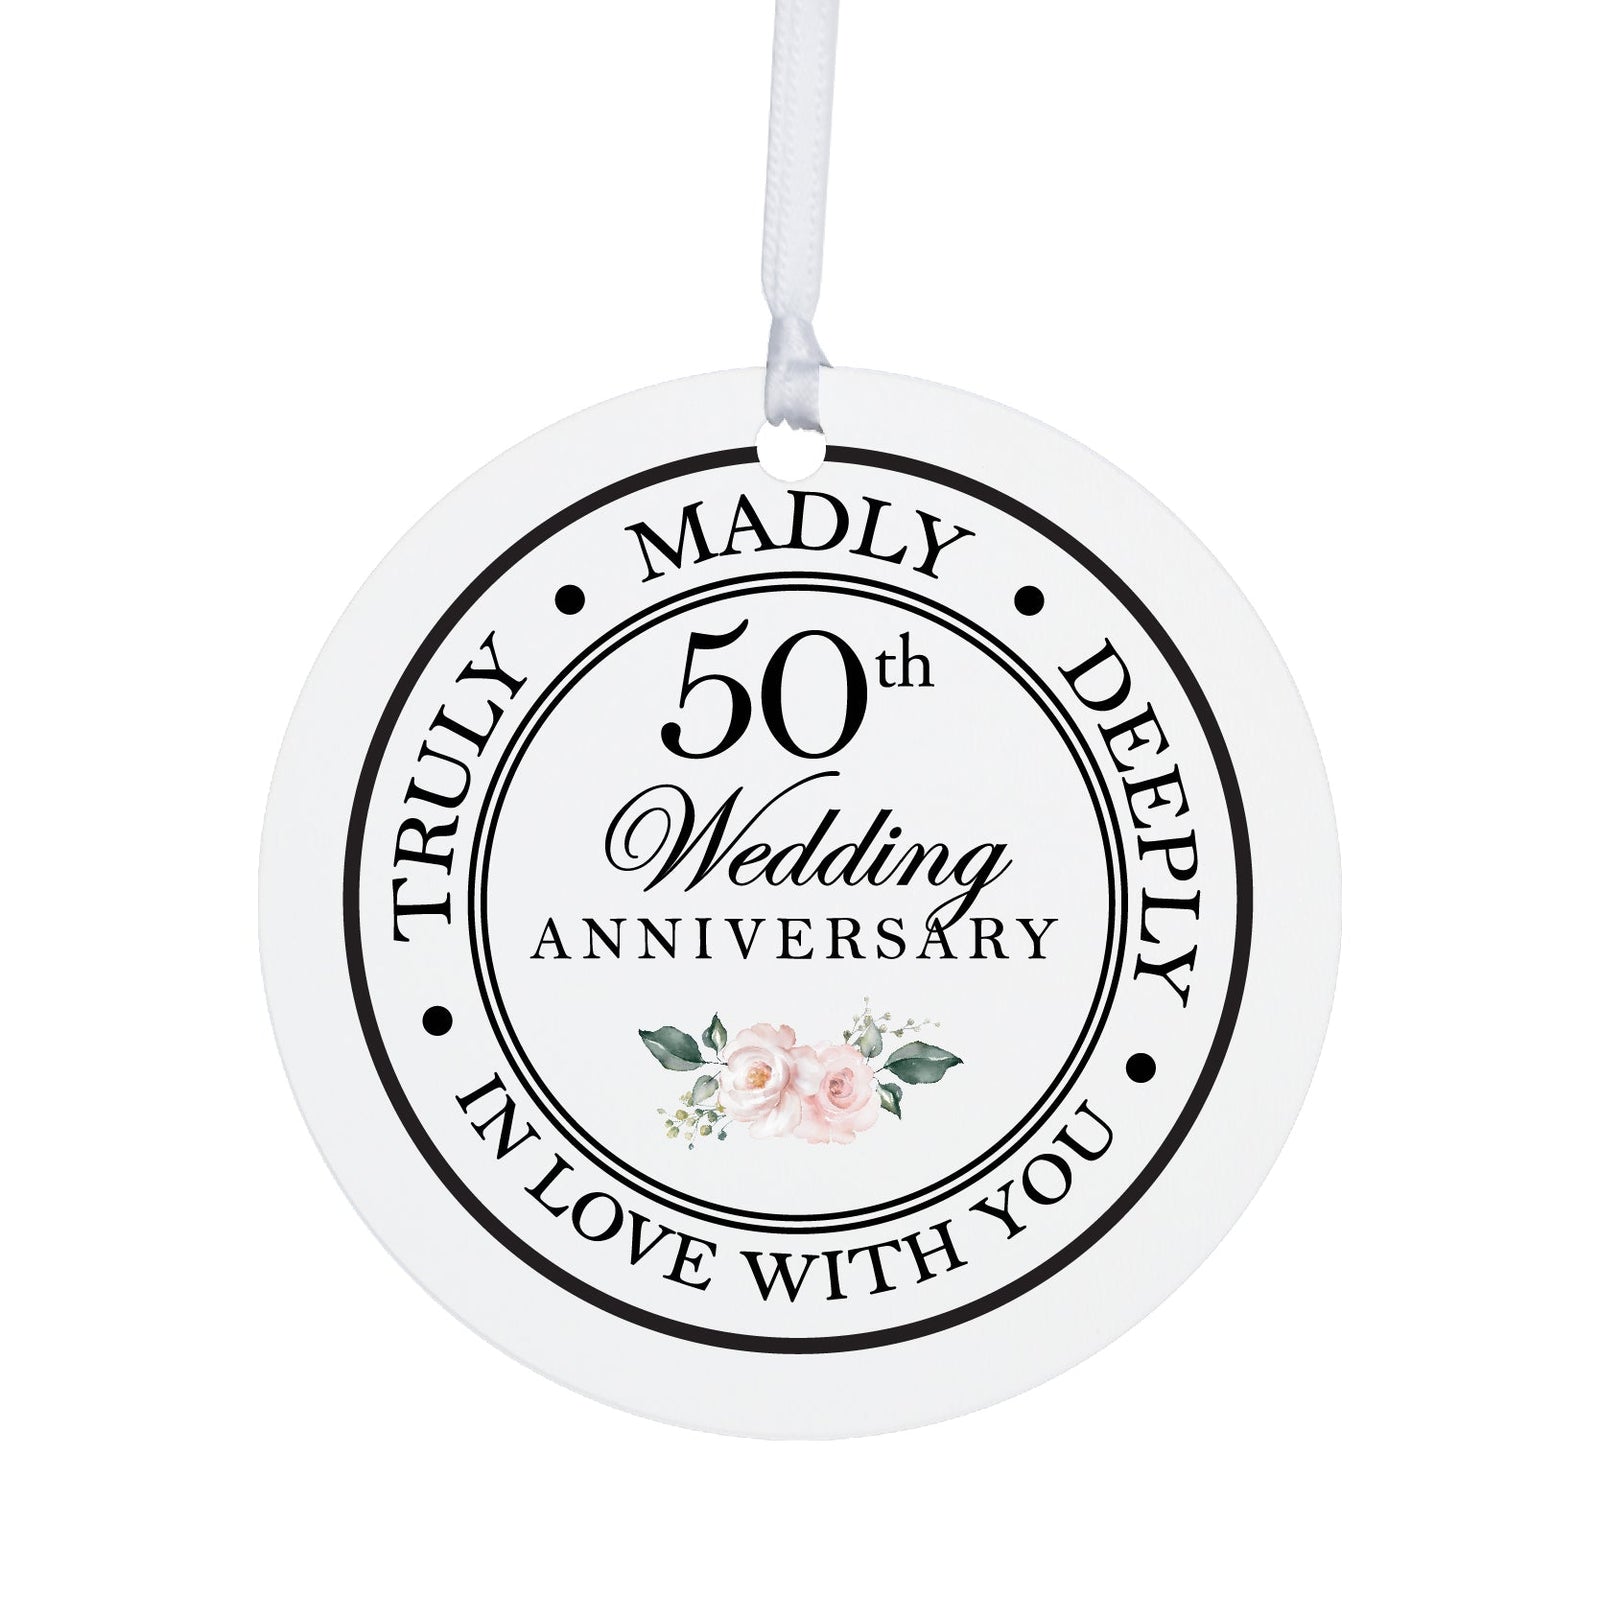 50th Wedding Anniversary White Ornament With Inspirational Message Gift Ideas - Truly, Madly, Deeply In Love With You - LifeSong Milestones